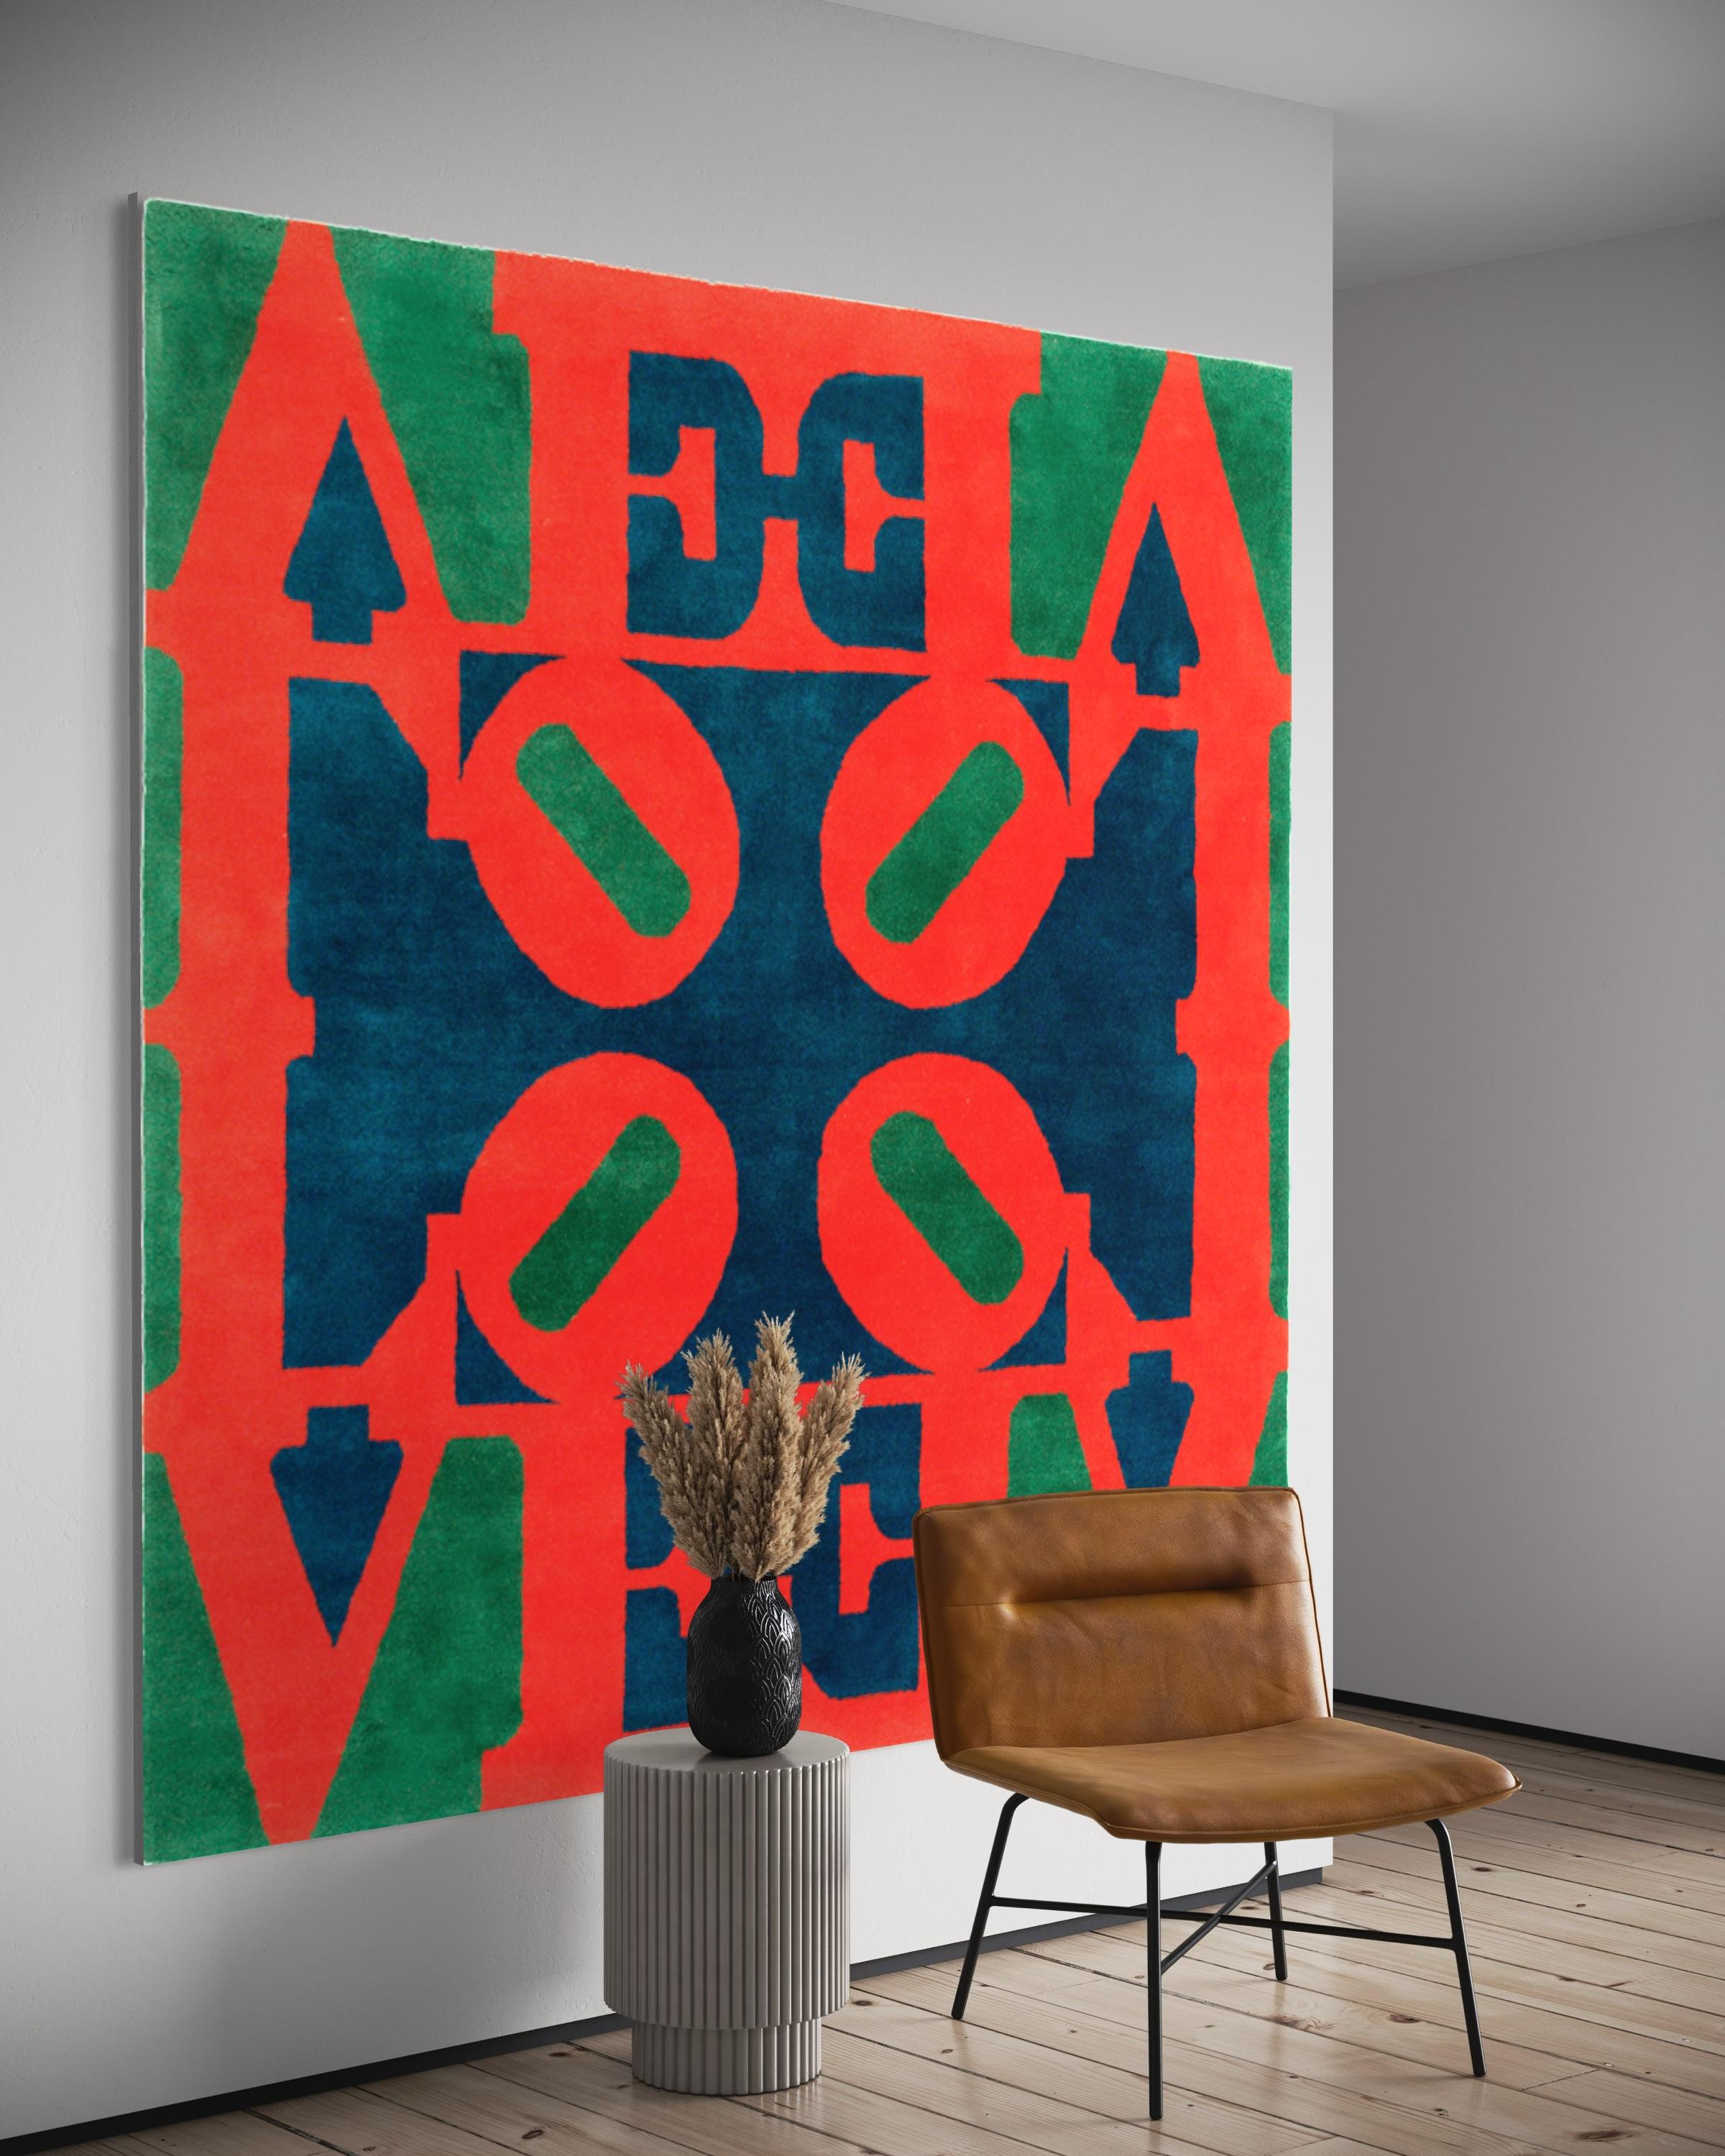 Love Tapestry - Print by Robert Indiana